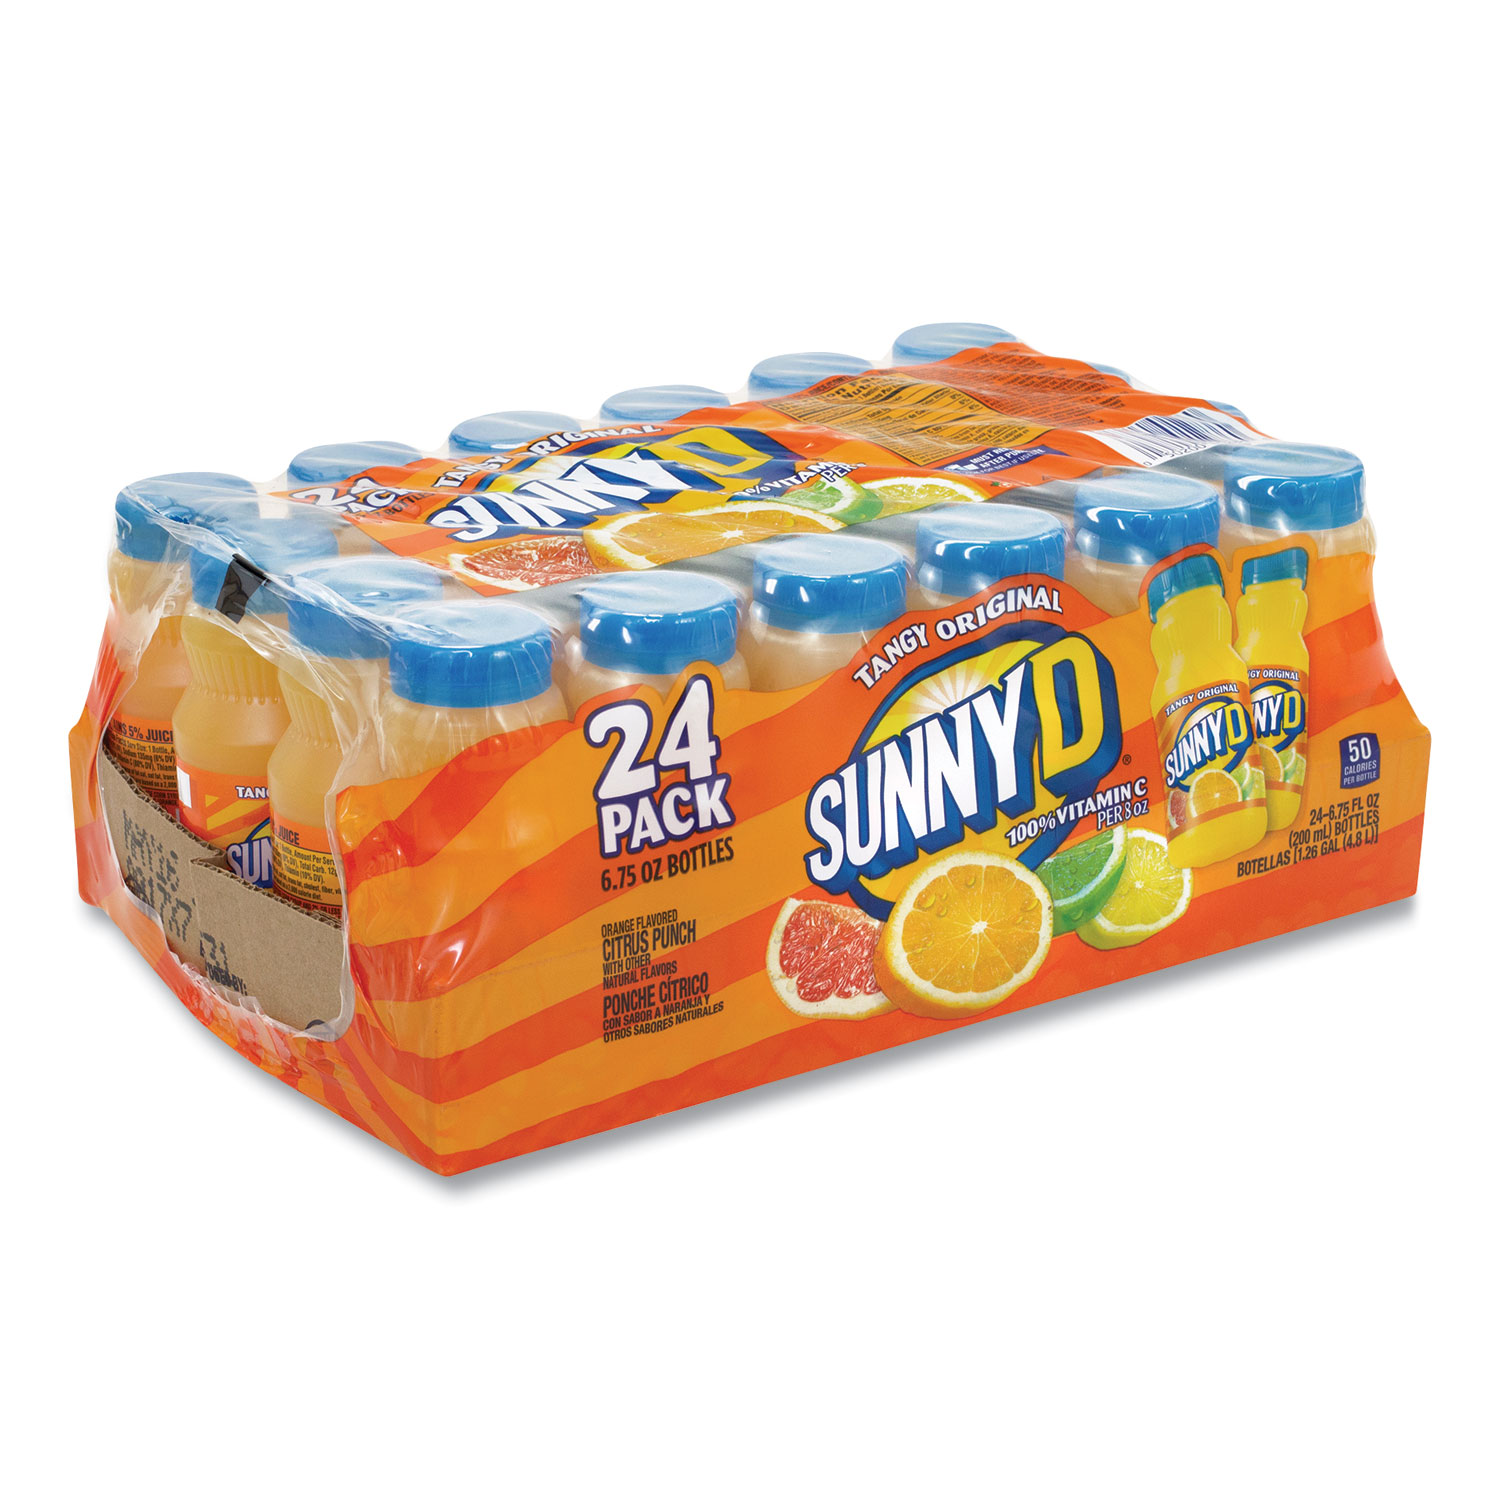  SUNNY D 1286 Tangy Original Orange Flavored Citrus Punch, 6.75 oz Bottle, 24/Pack, Free Delivery in 1-4 Business Days (GRR90000121) 